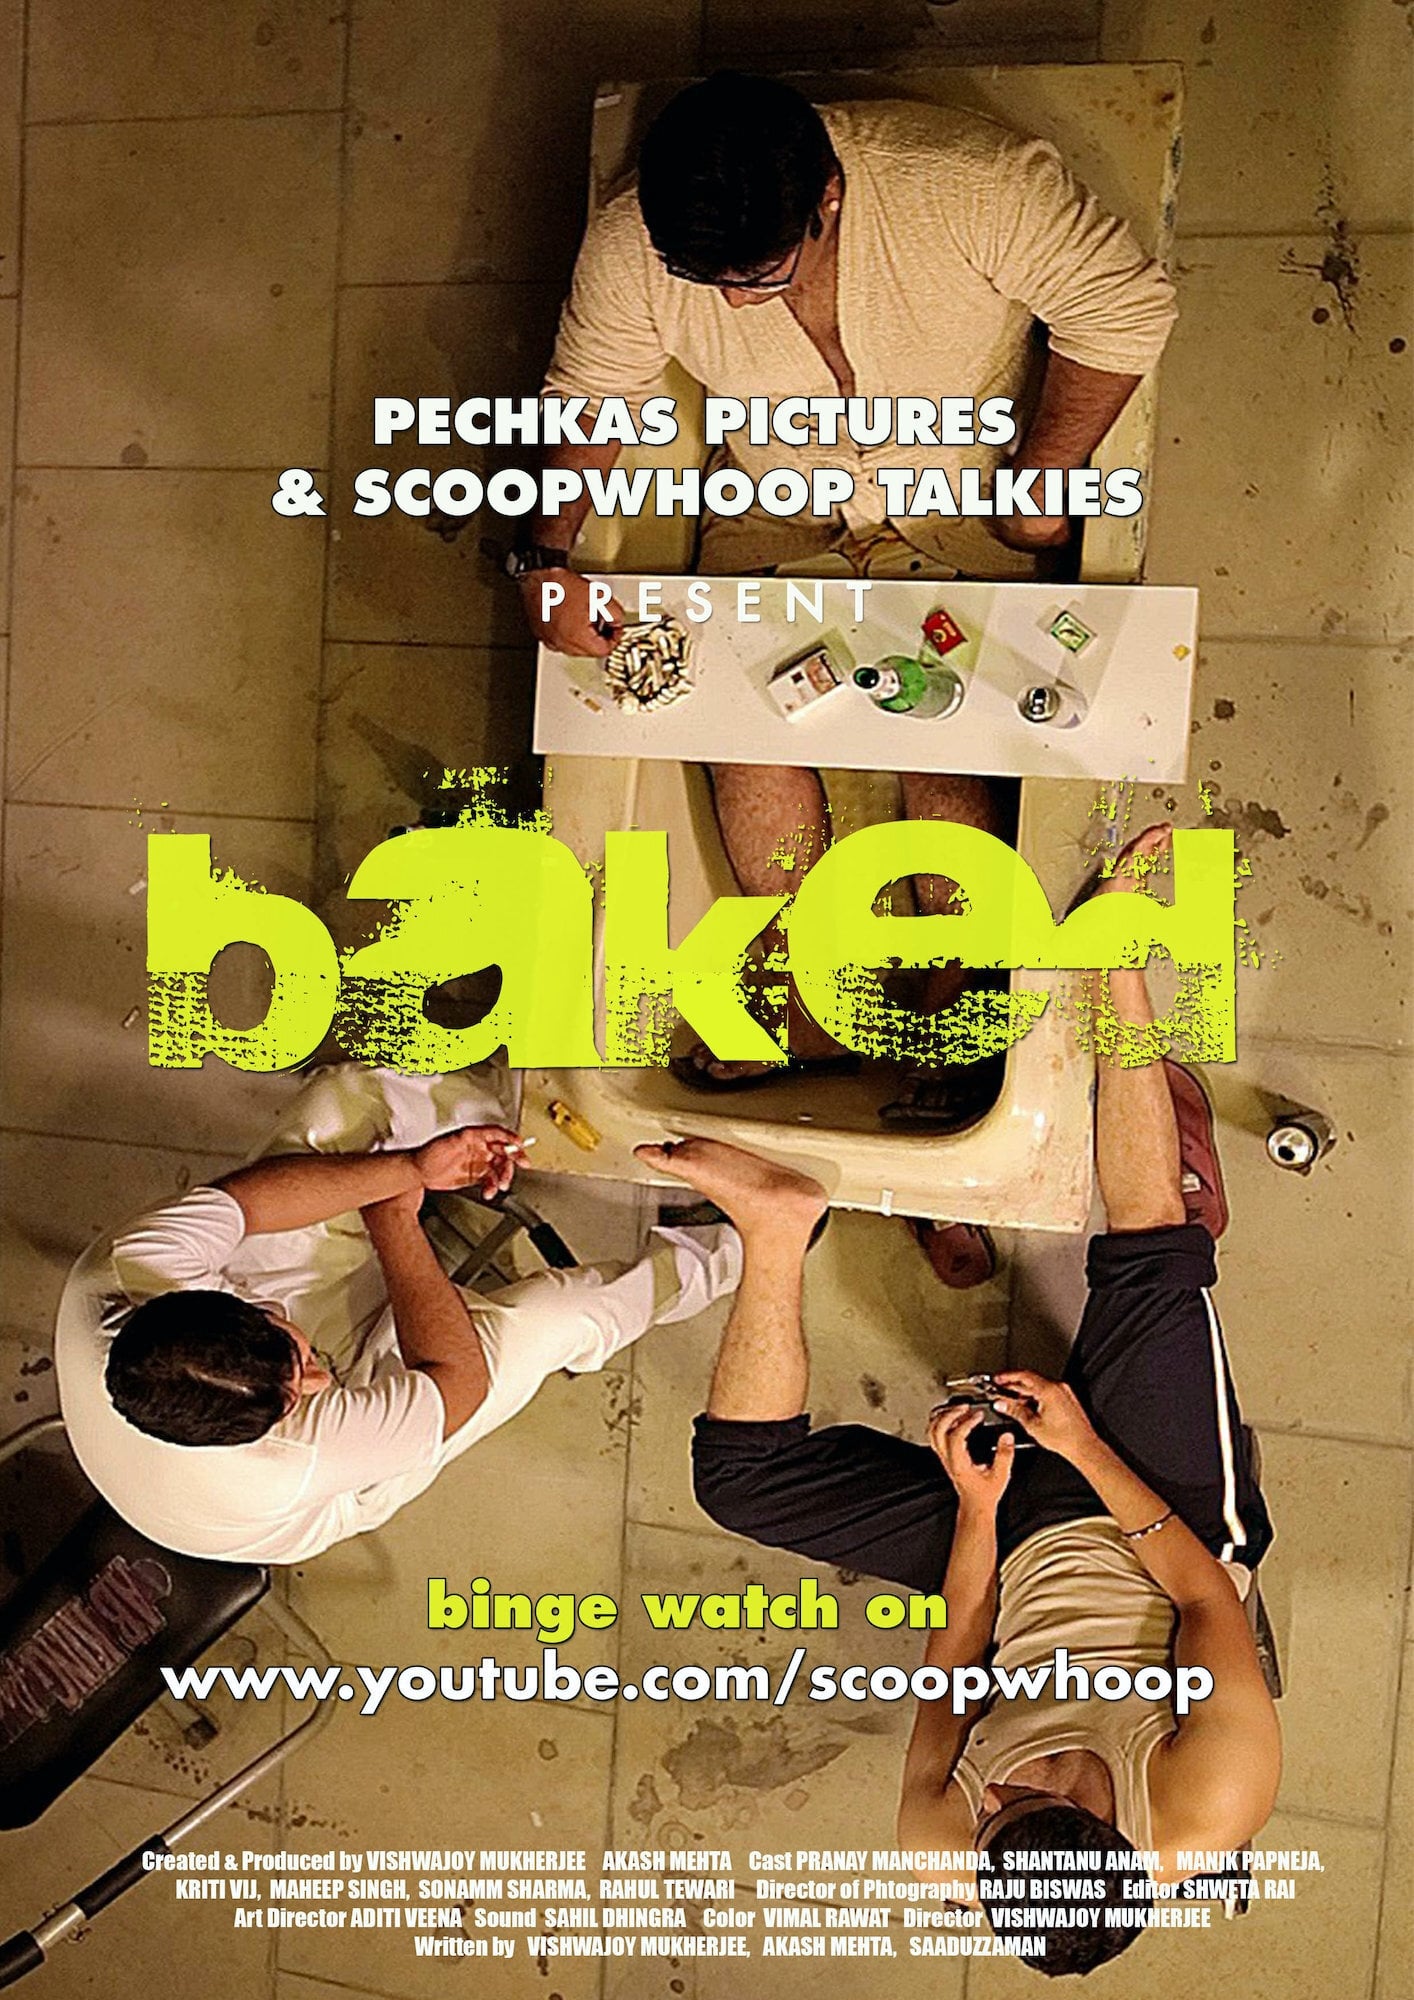 Baked (2015)